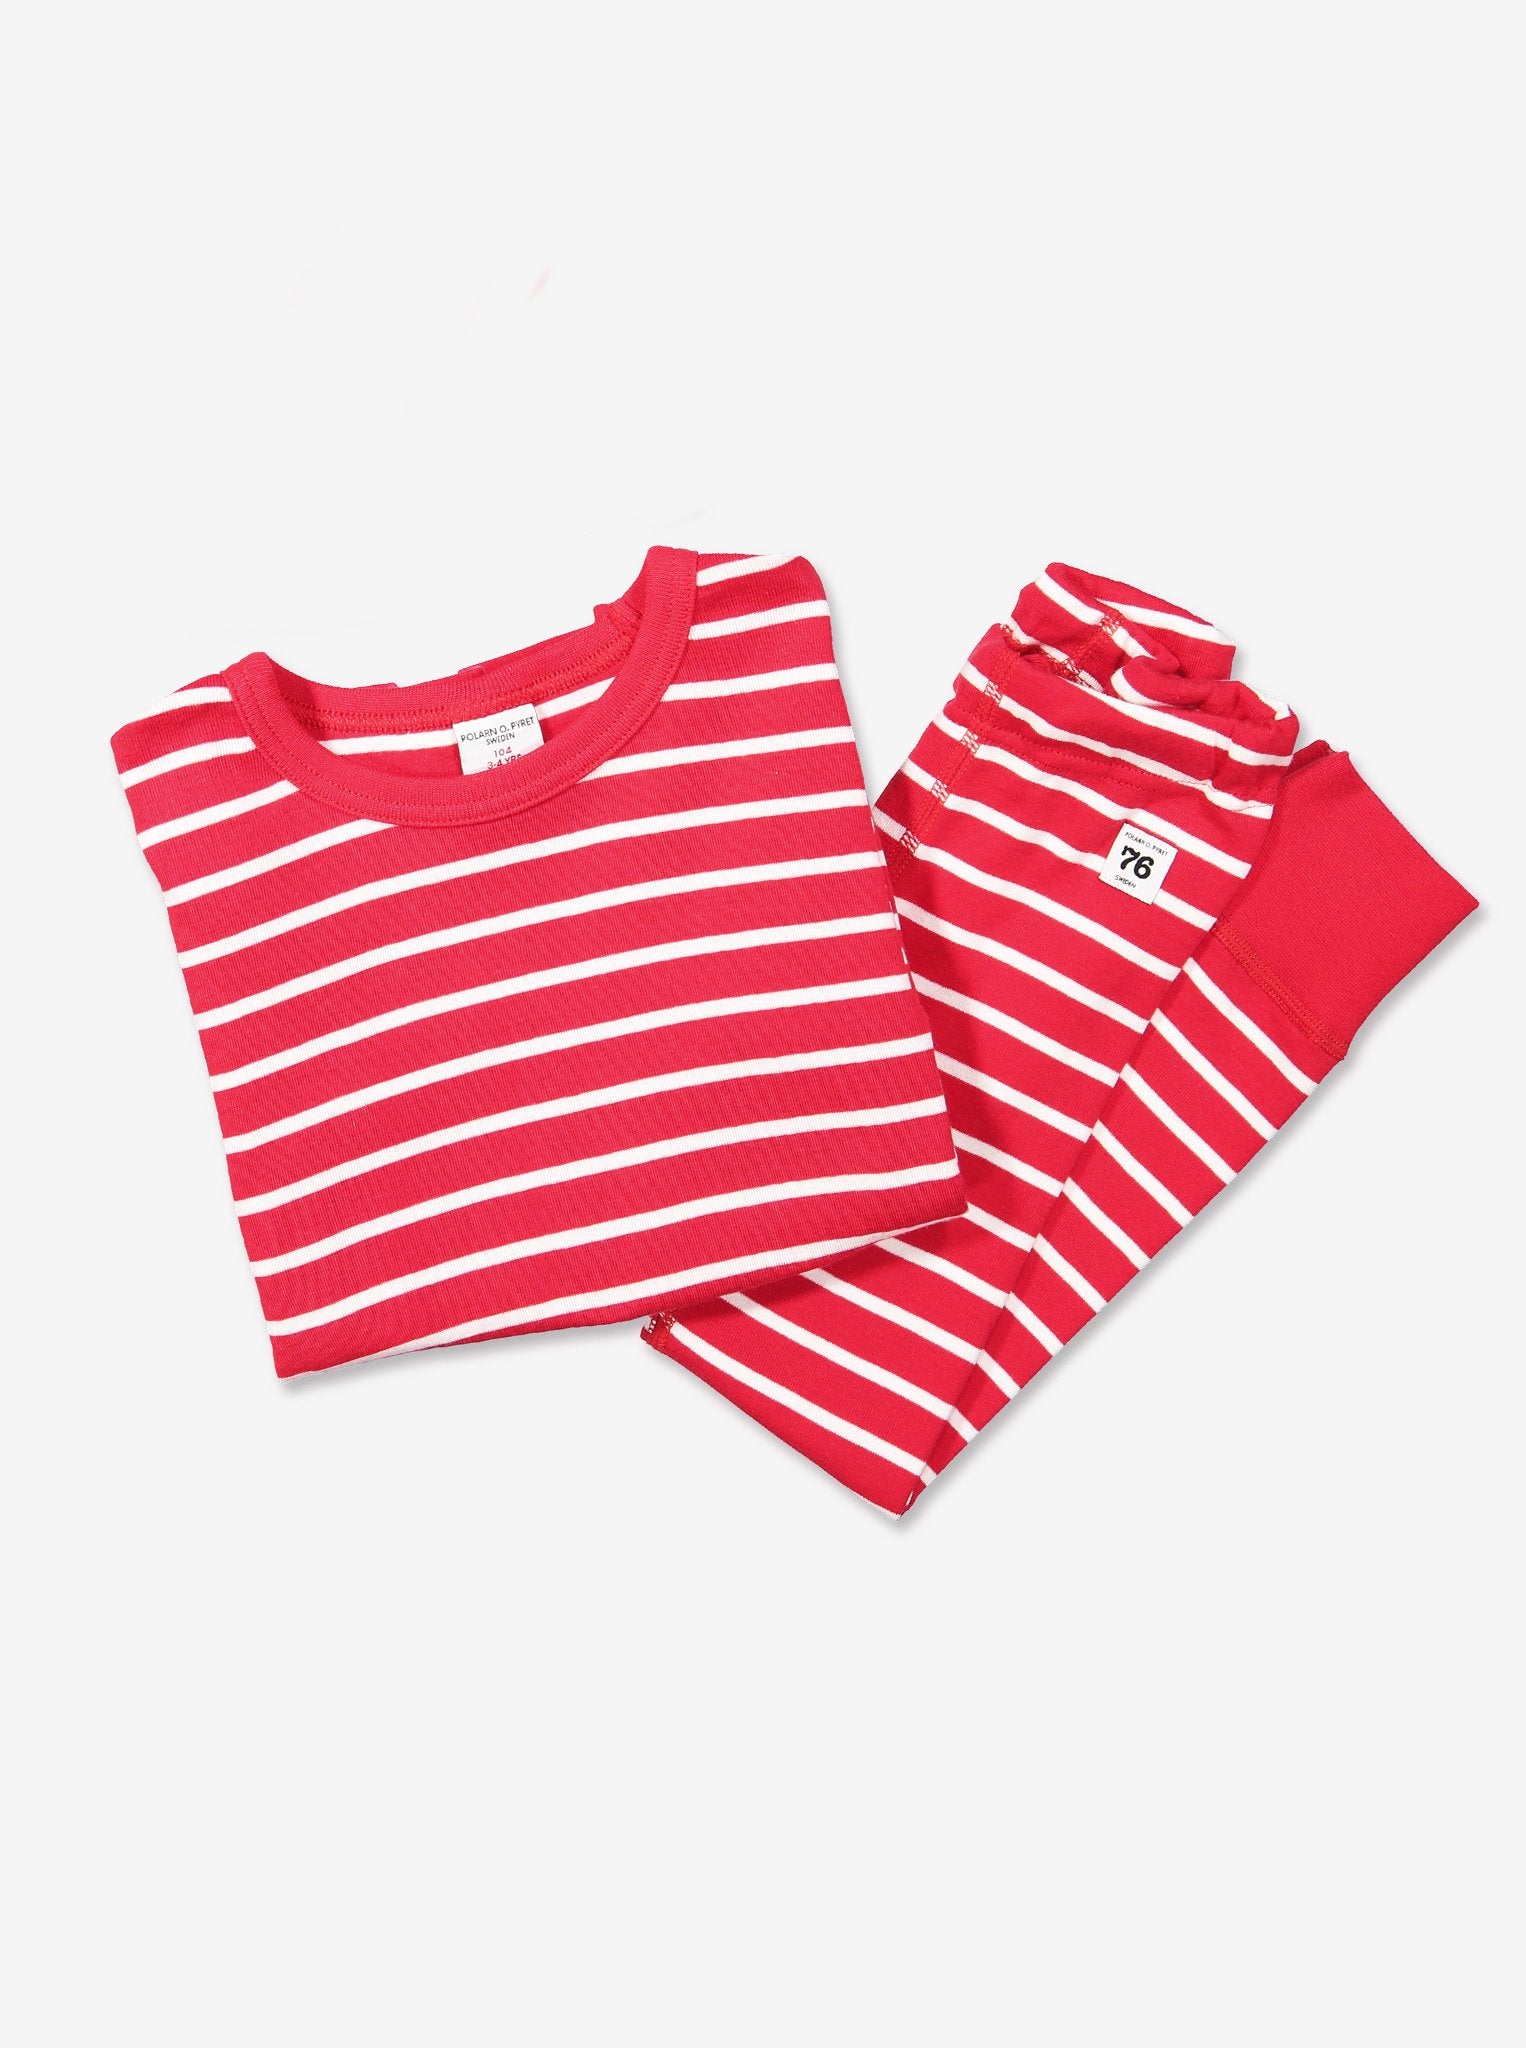 red and white stripes kids leggings and top , ethical organic cotton, long lasting polarn o. pyret quality